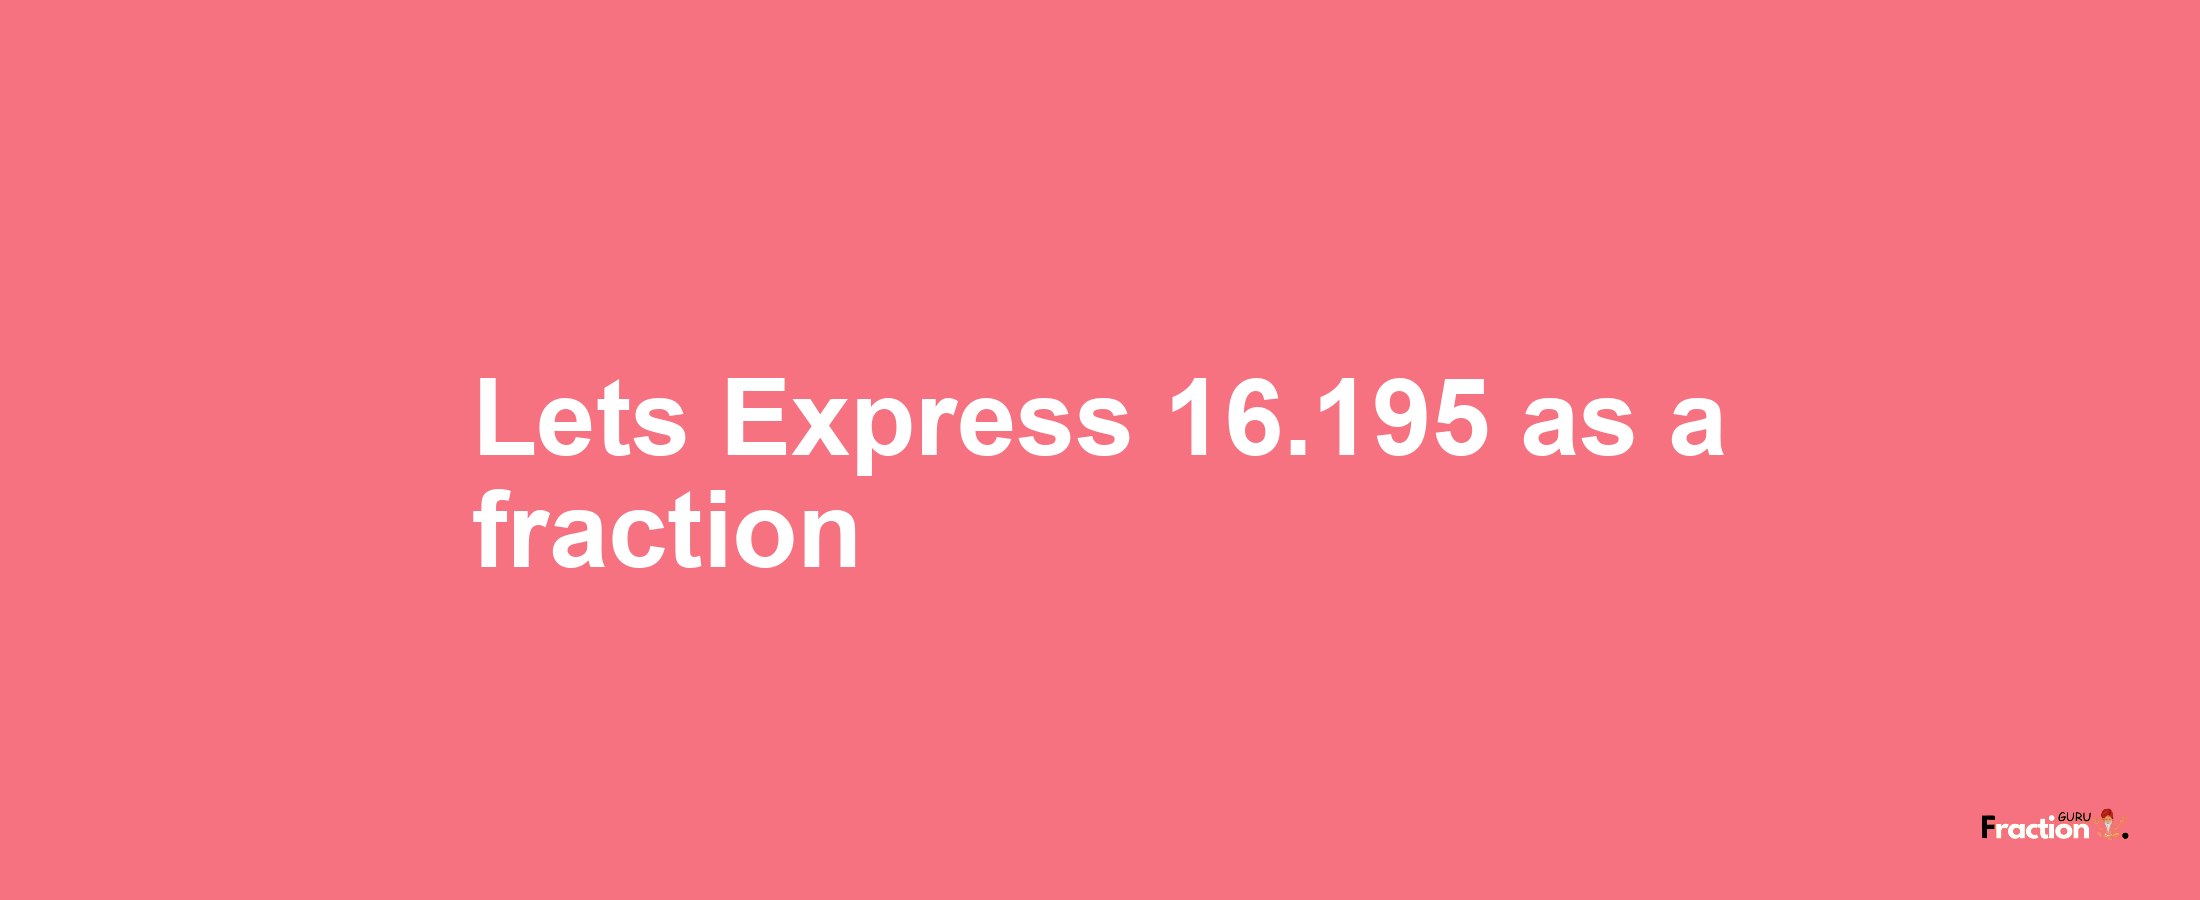 Lets Express 16.195 as afraction